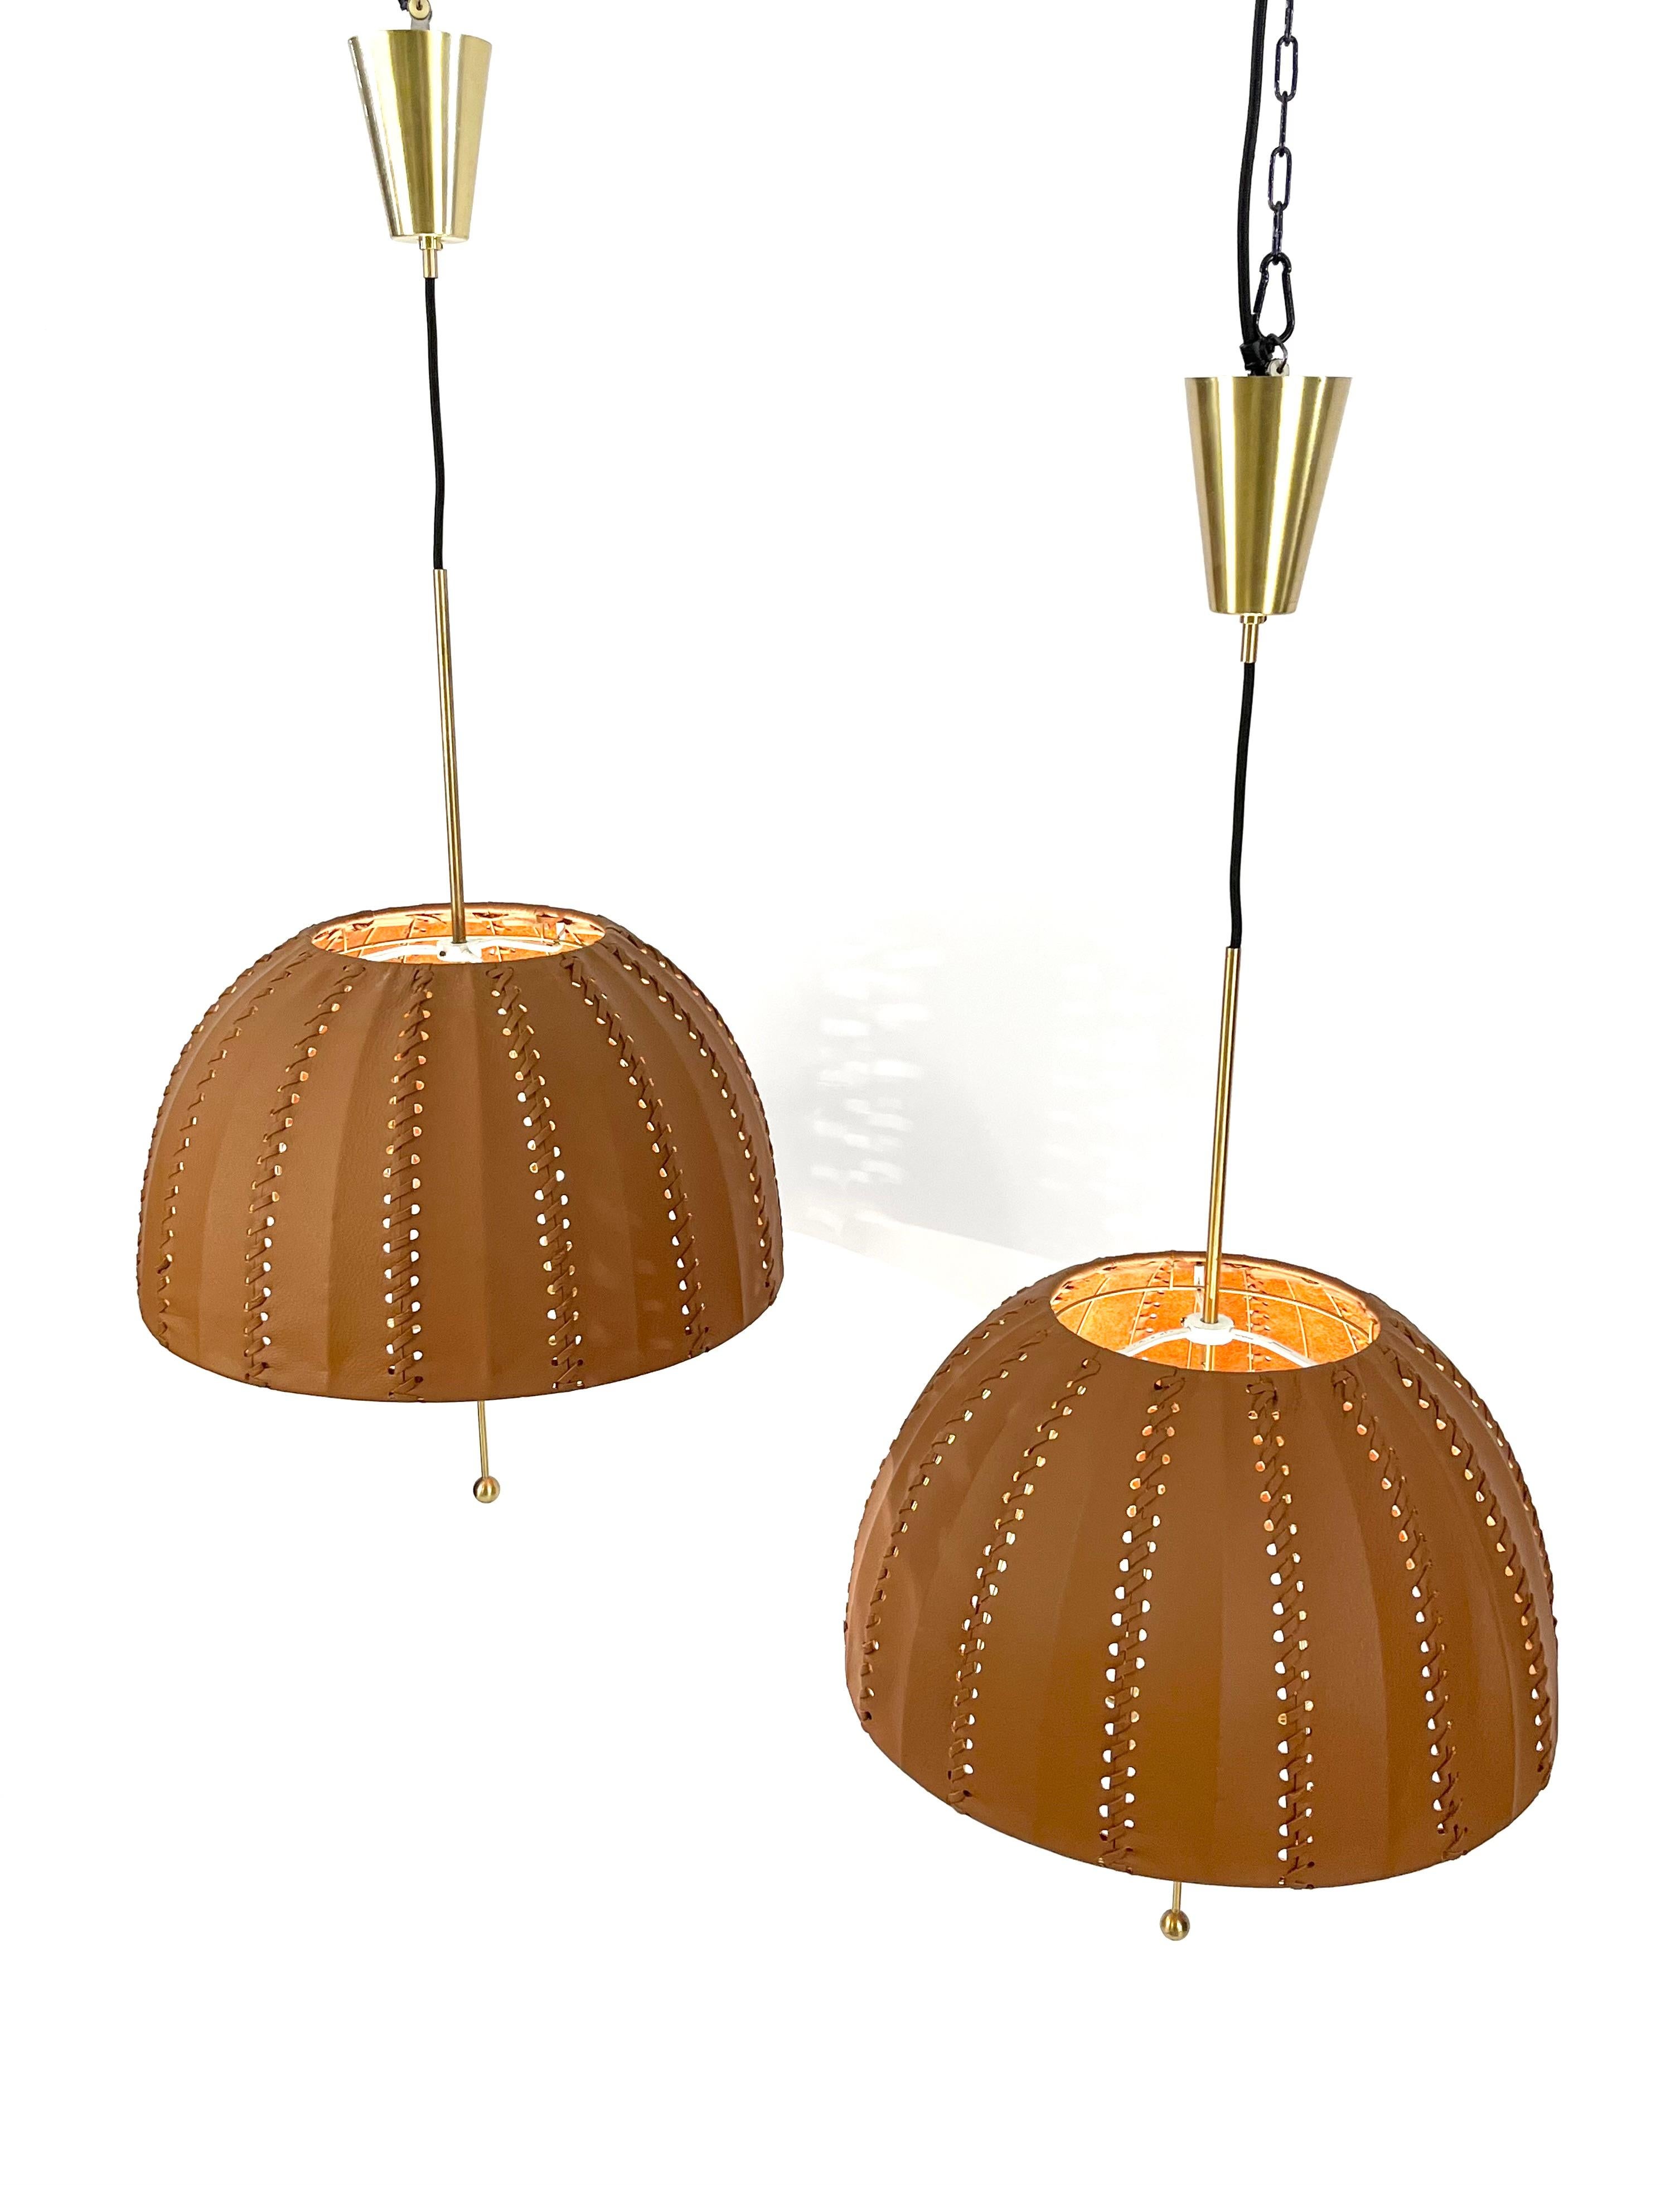 Beautiful original 1960s pendant lamps “Carolin” model T549 by Hans-Agne Jakobsson for Markaryd Sweden.
Refurnished shades in brown leather. 
The height of the lampshade is adjustable.
